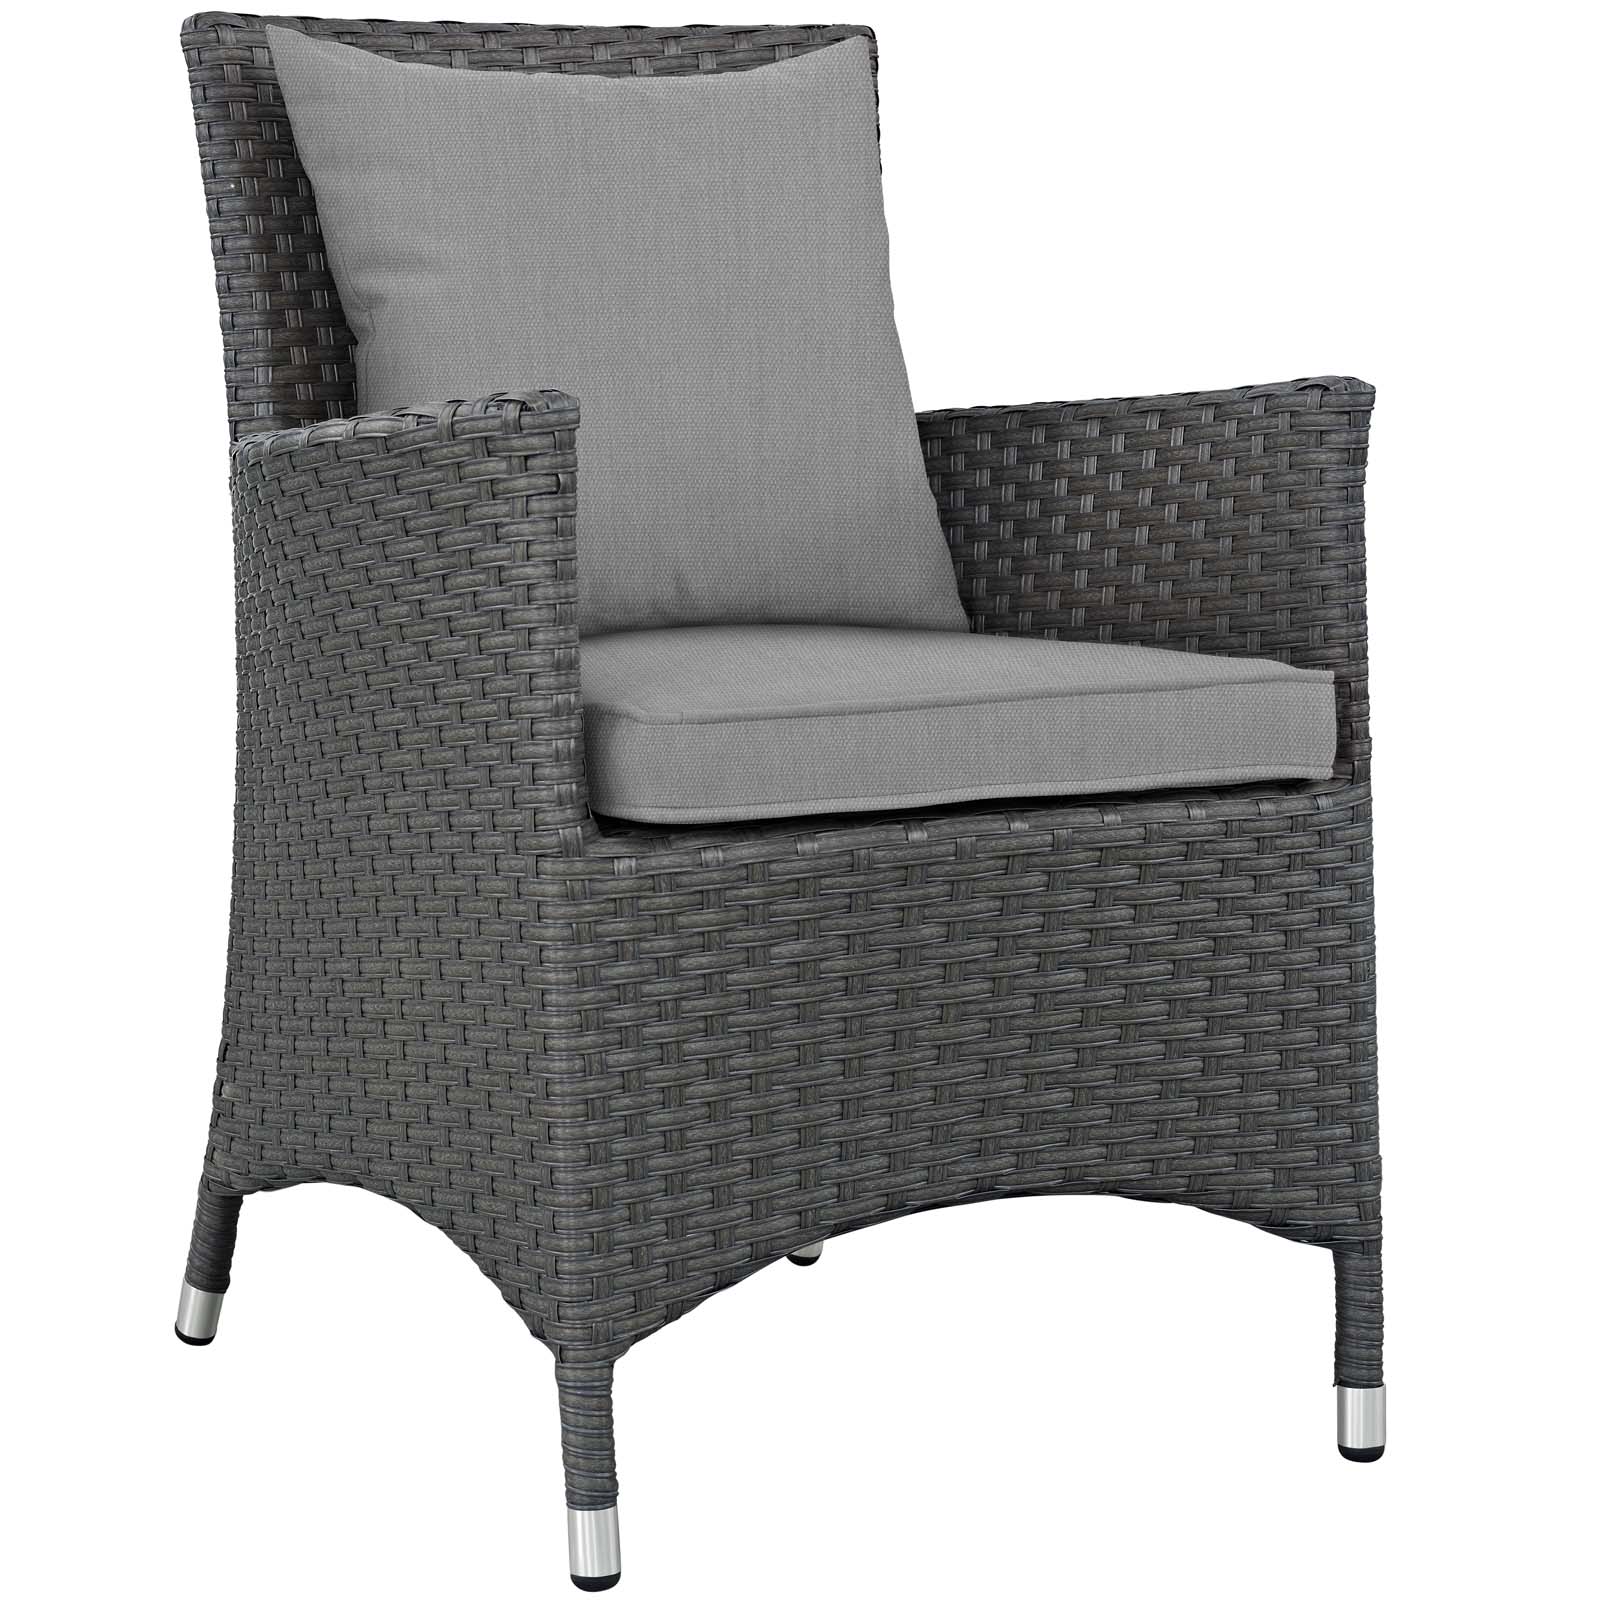 Modern Contemporary Urban Outdoor Patio Balcony Garden Furniture Side Dining Chair and Table Set, Sunbrella Rattan Wicker, Grey Gray - image 3 of 6